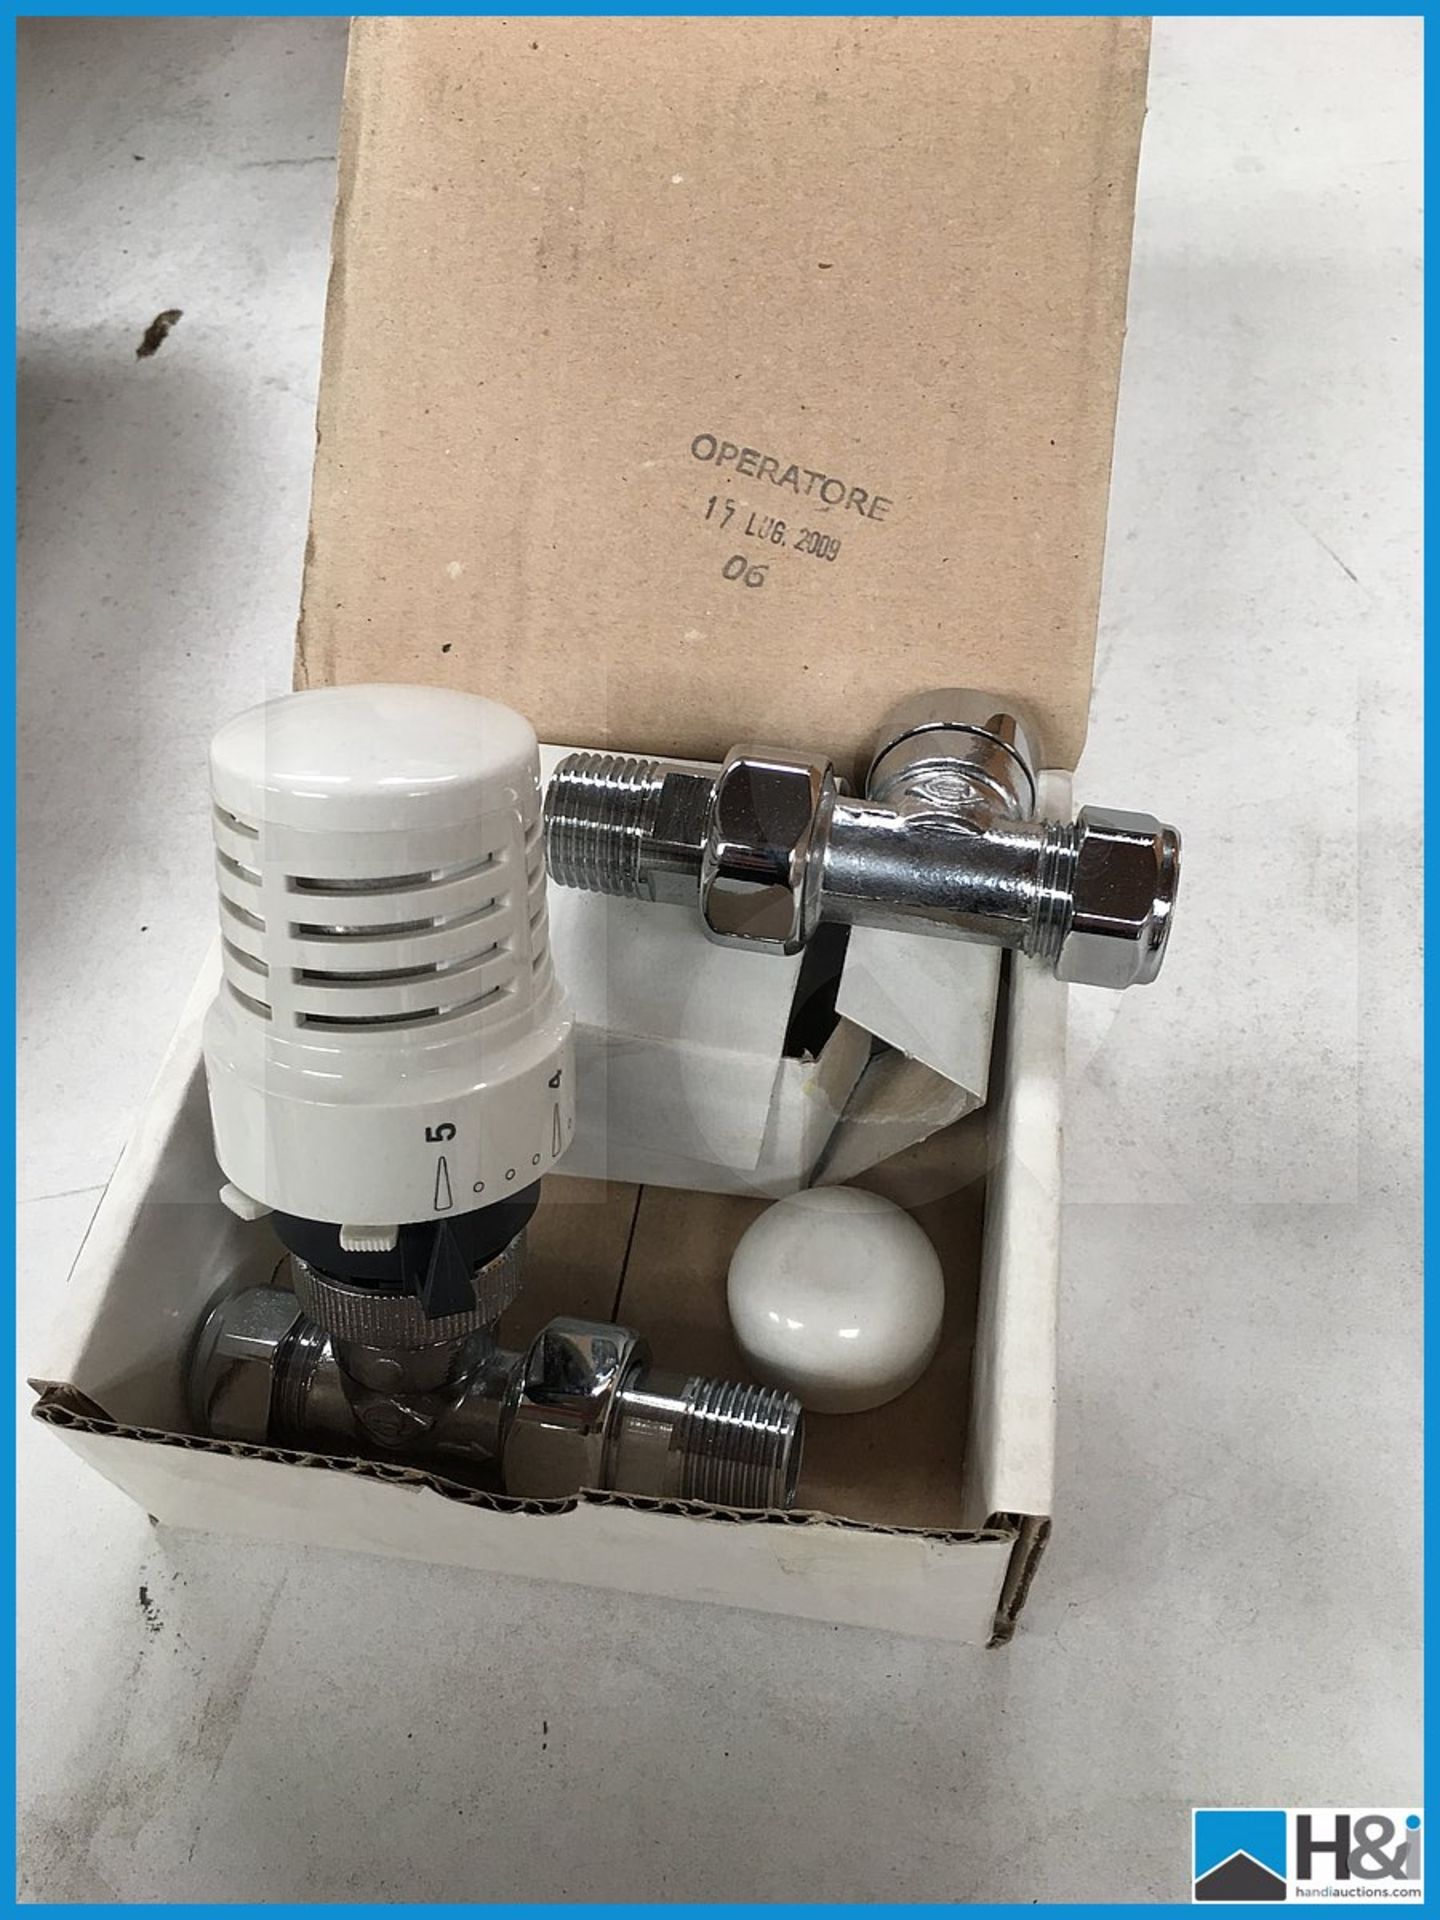 Designer MHS TR8 straight manual radiator valve. New and boxed. Suggested manufacturers selling